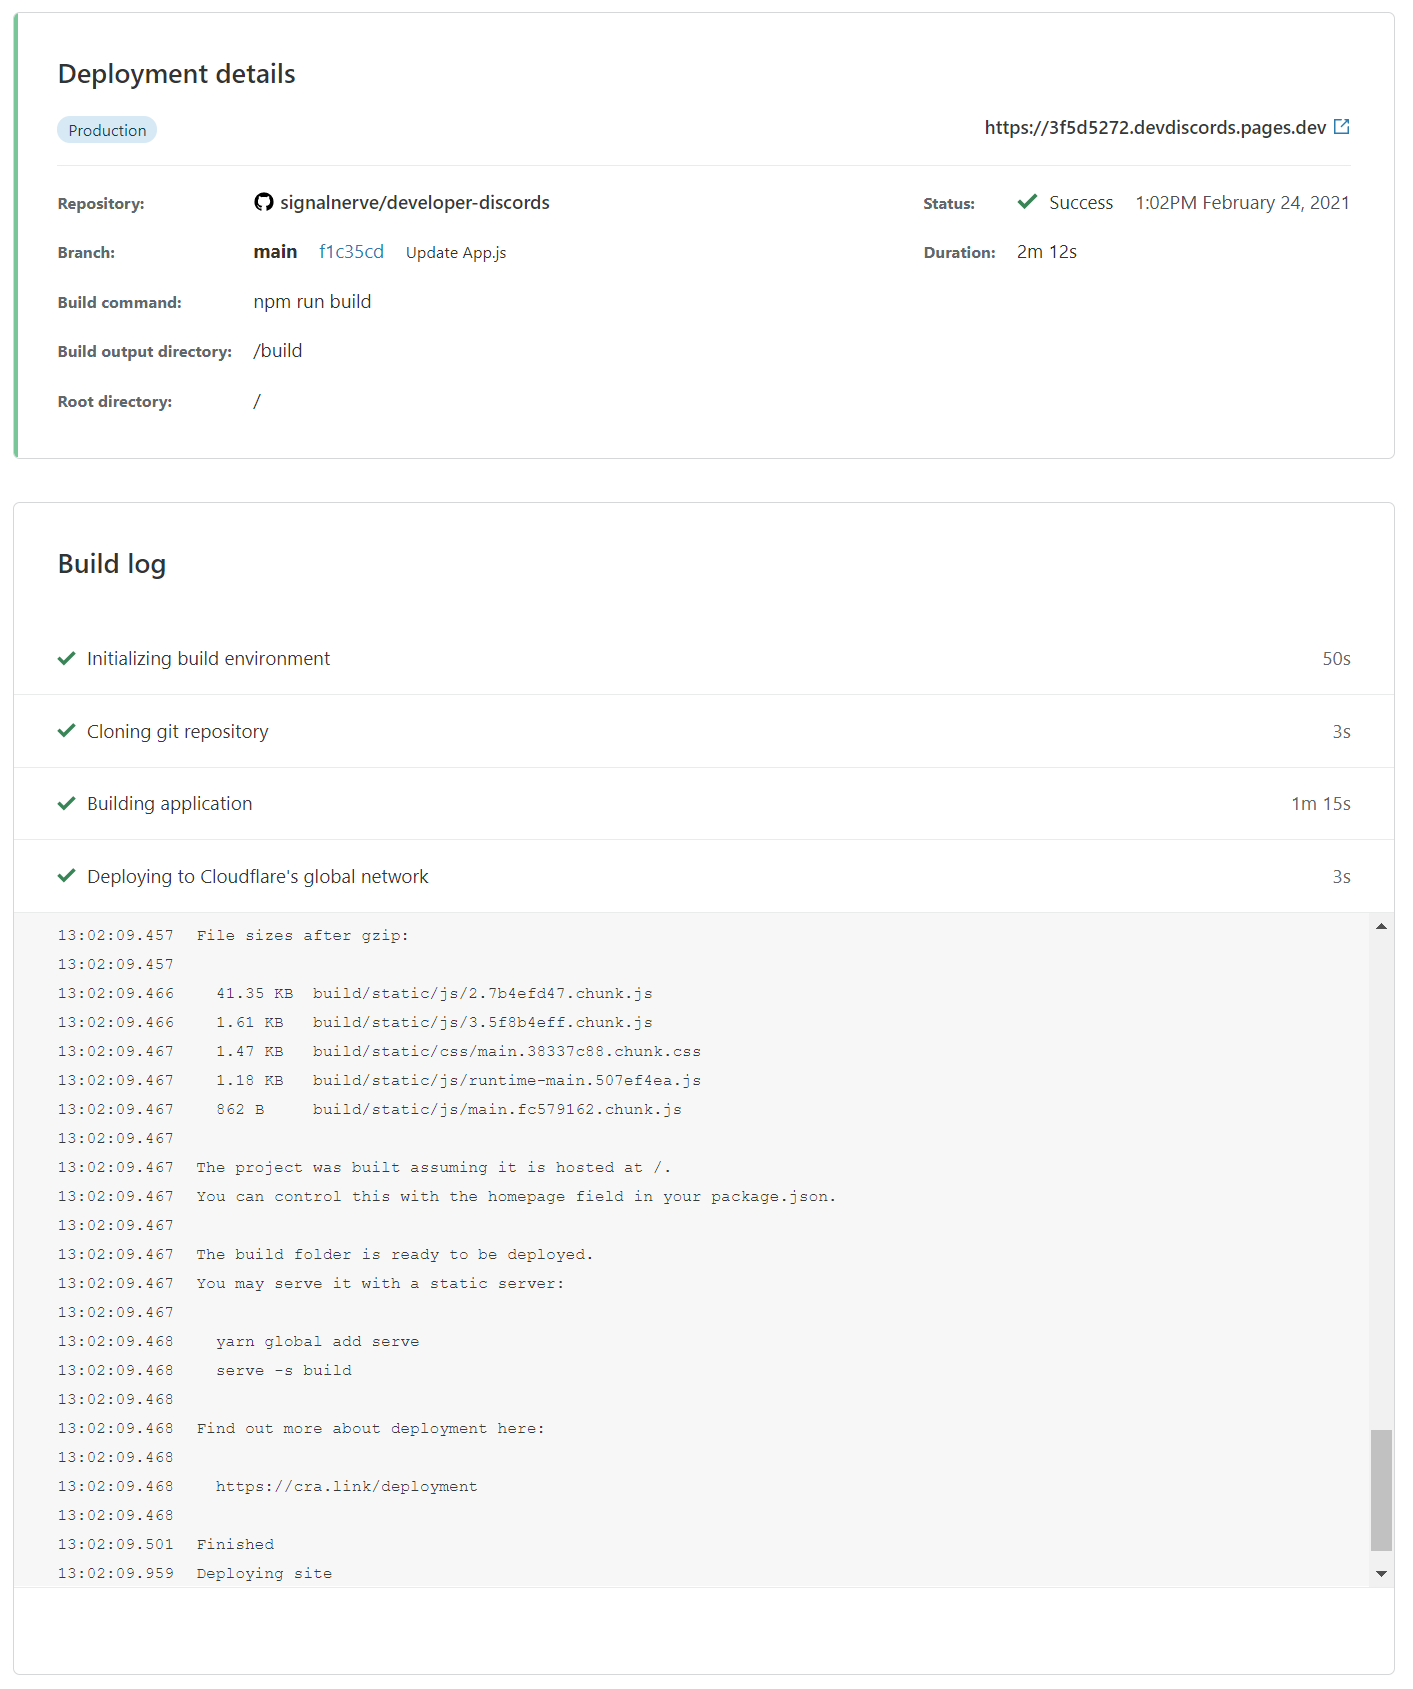 Deployment details in the Cloudflare dashboard